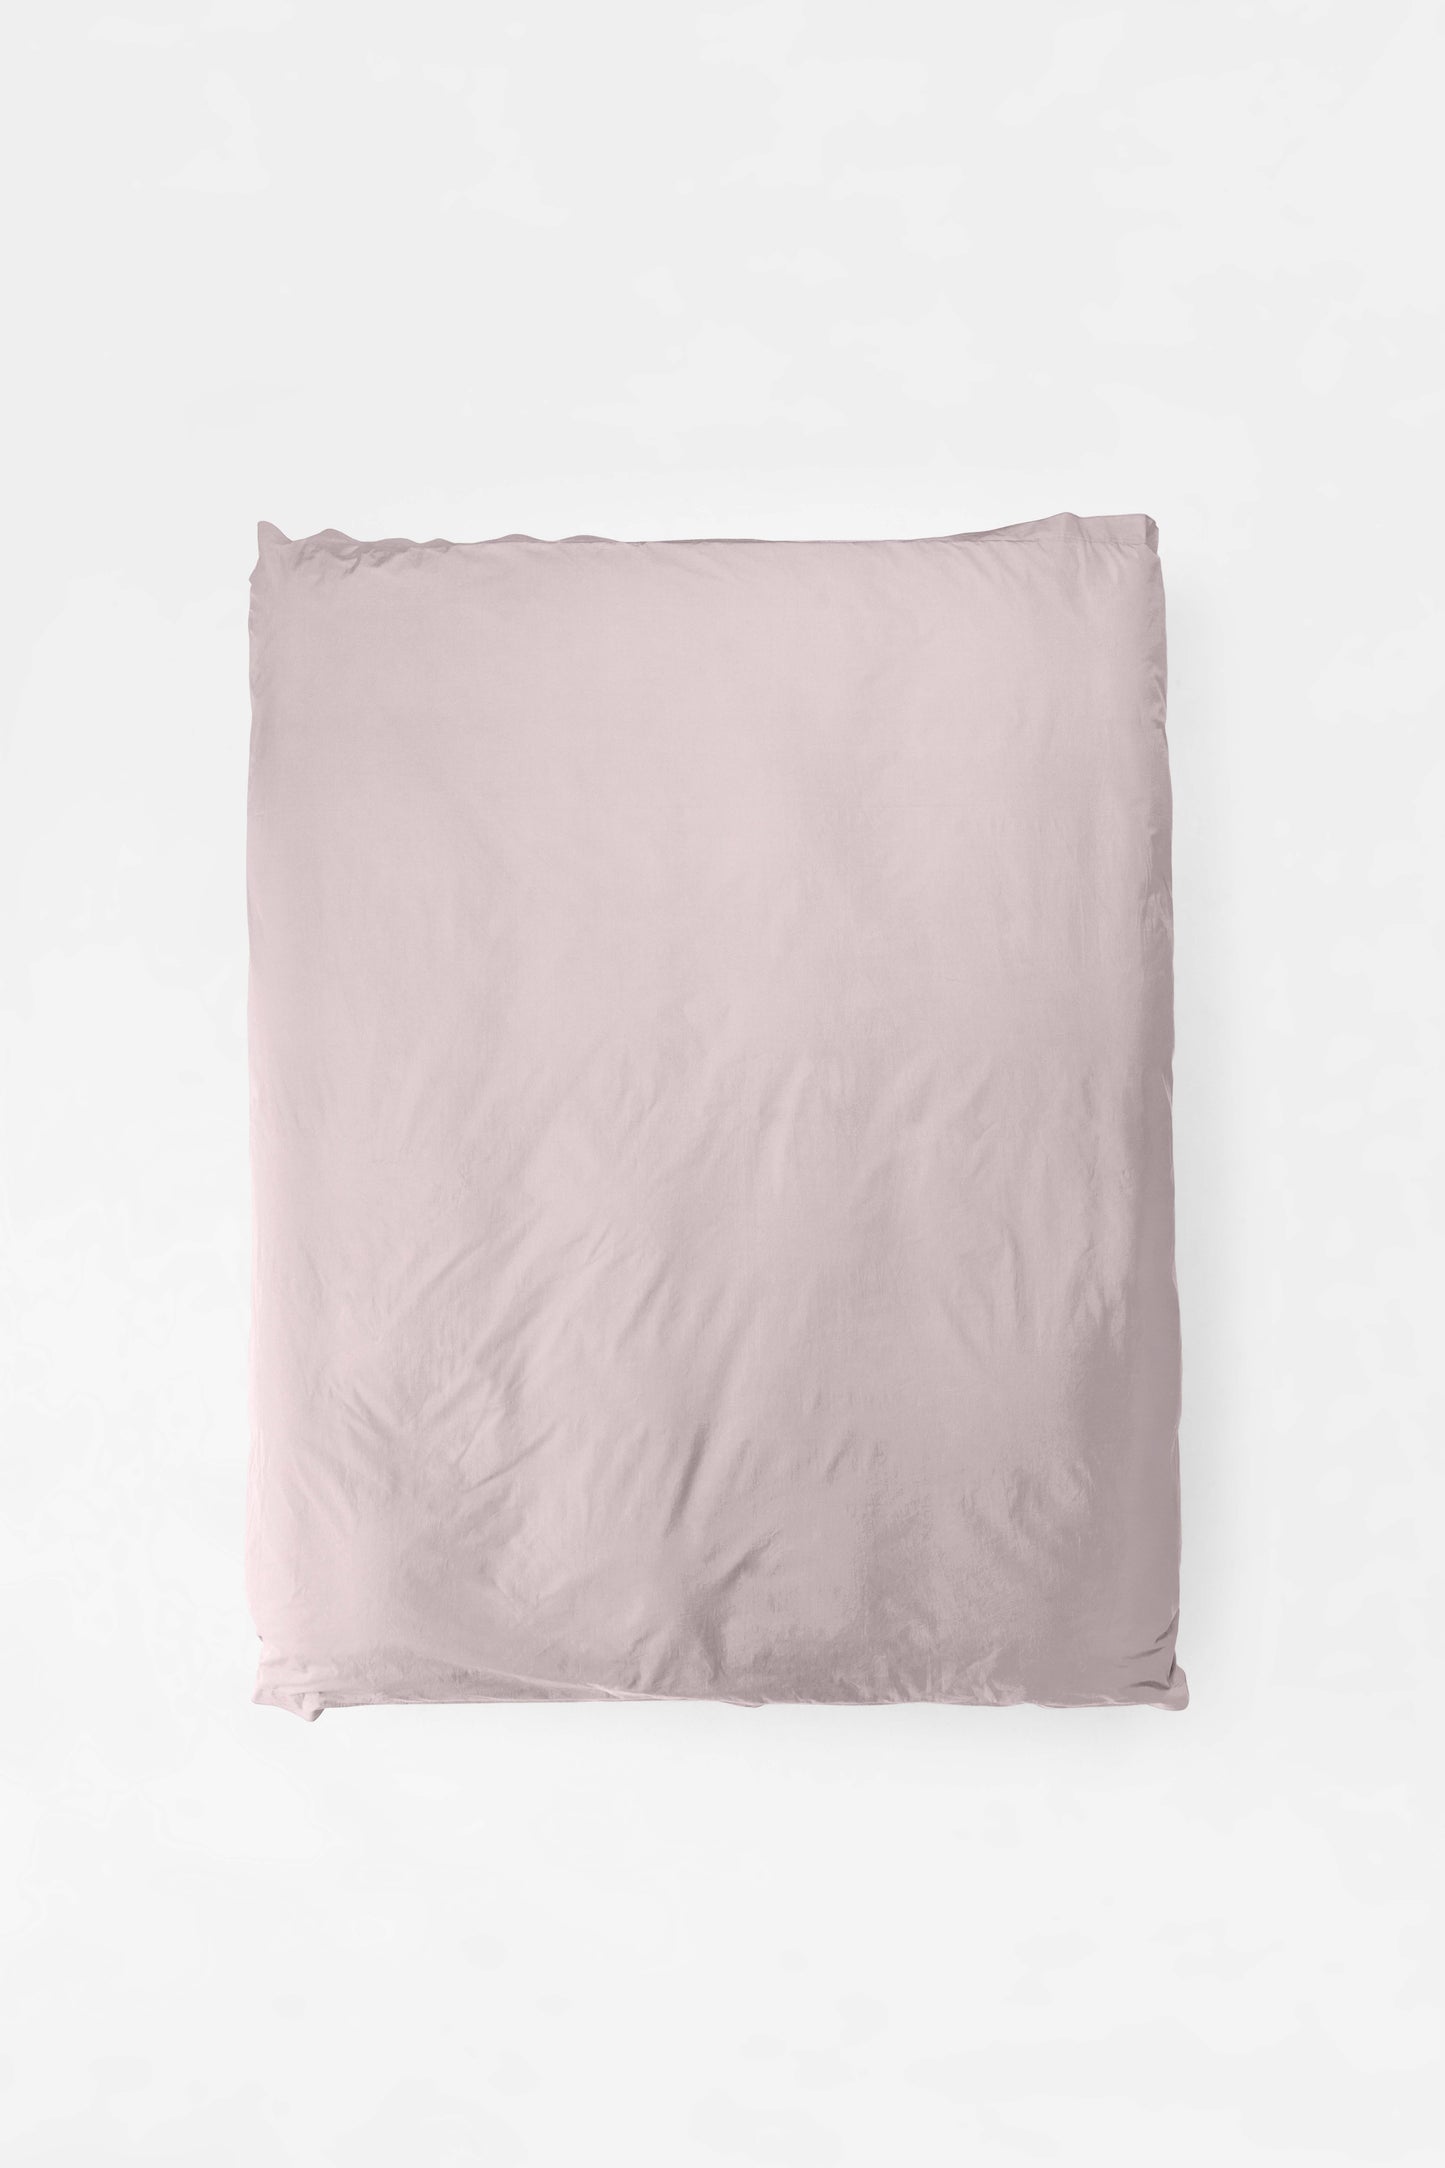 Duvet Cover in Lilac